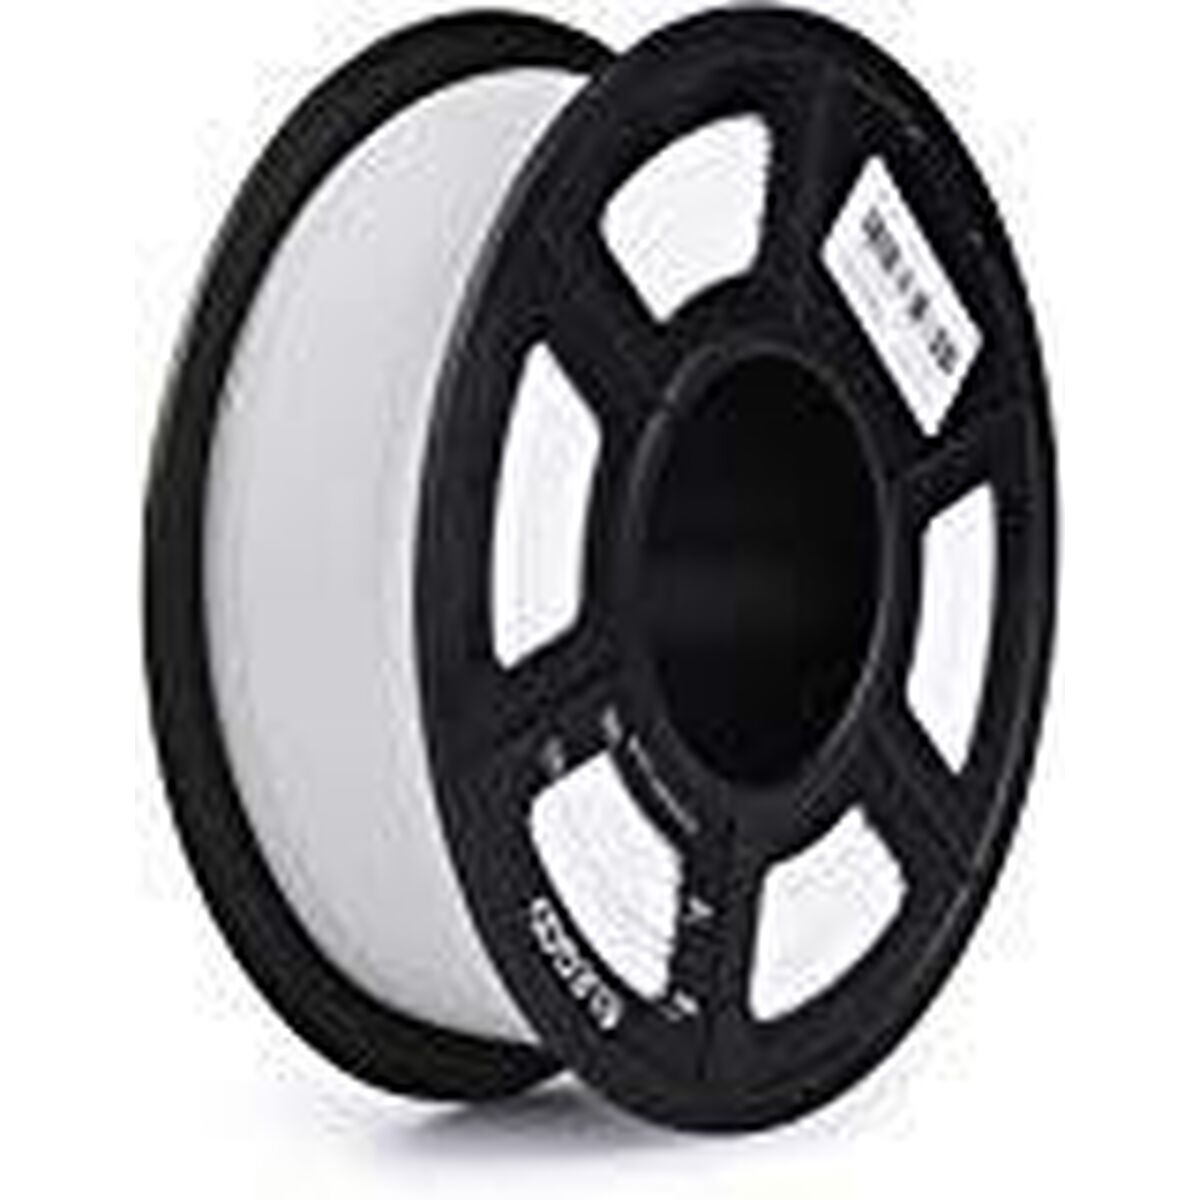 Filament Reel CoLiDo 3D-Gold White 1,75 mm